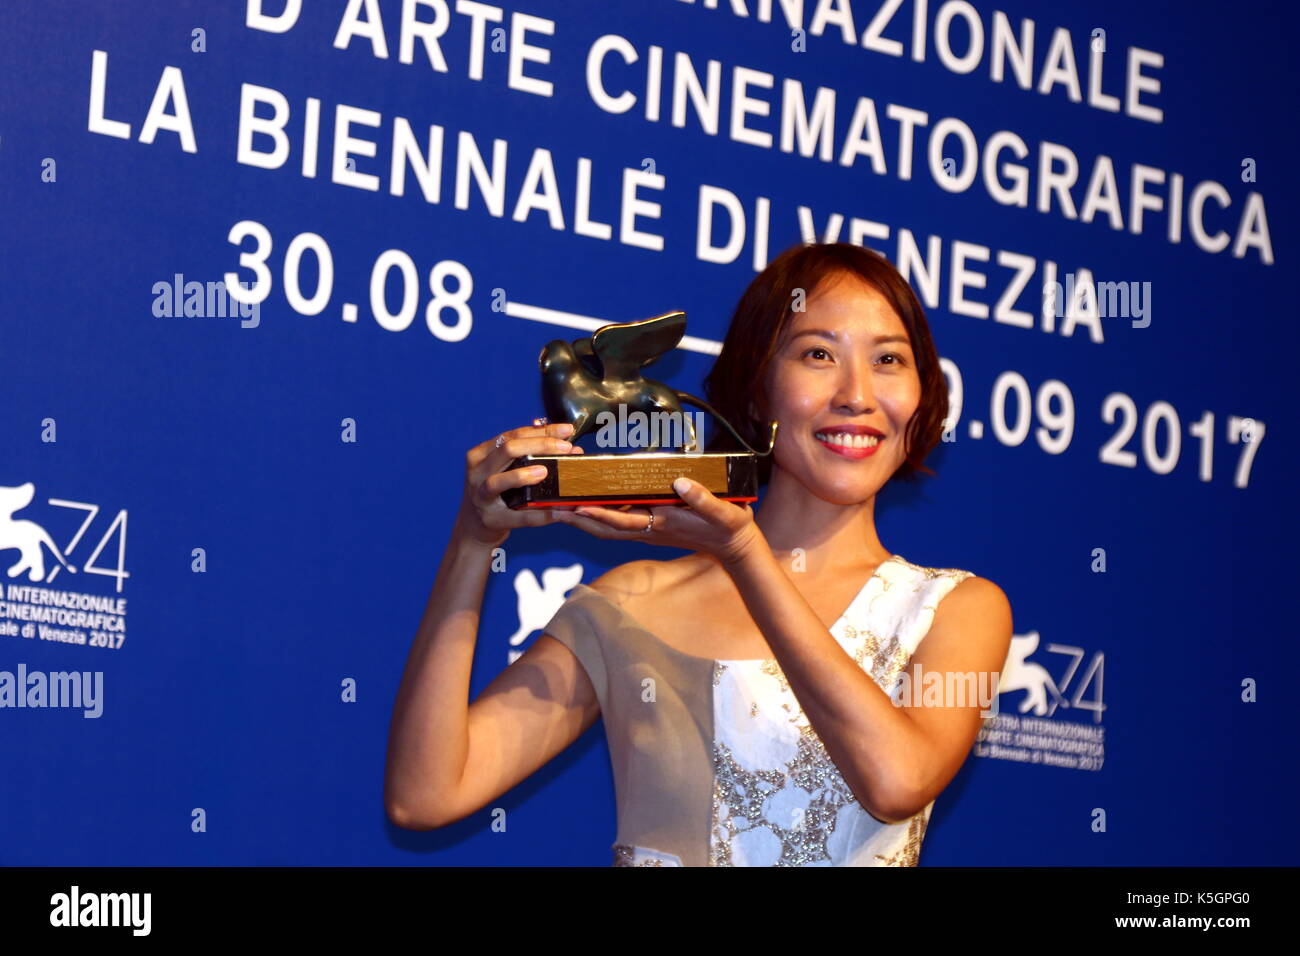 Venice, Italy. 9th September, 2017. Gina Kim poses with the Best VR Story Award for 'Bloodless' at the Award Photocall during the 74th Venice International Film Festival at Lido of Venice on 9th September, 2017. Credit: Andrea Spinelli/Alamy Live News Stock Photo